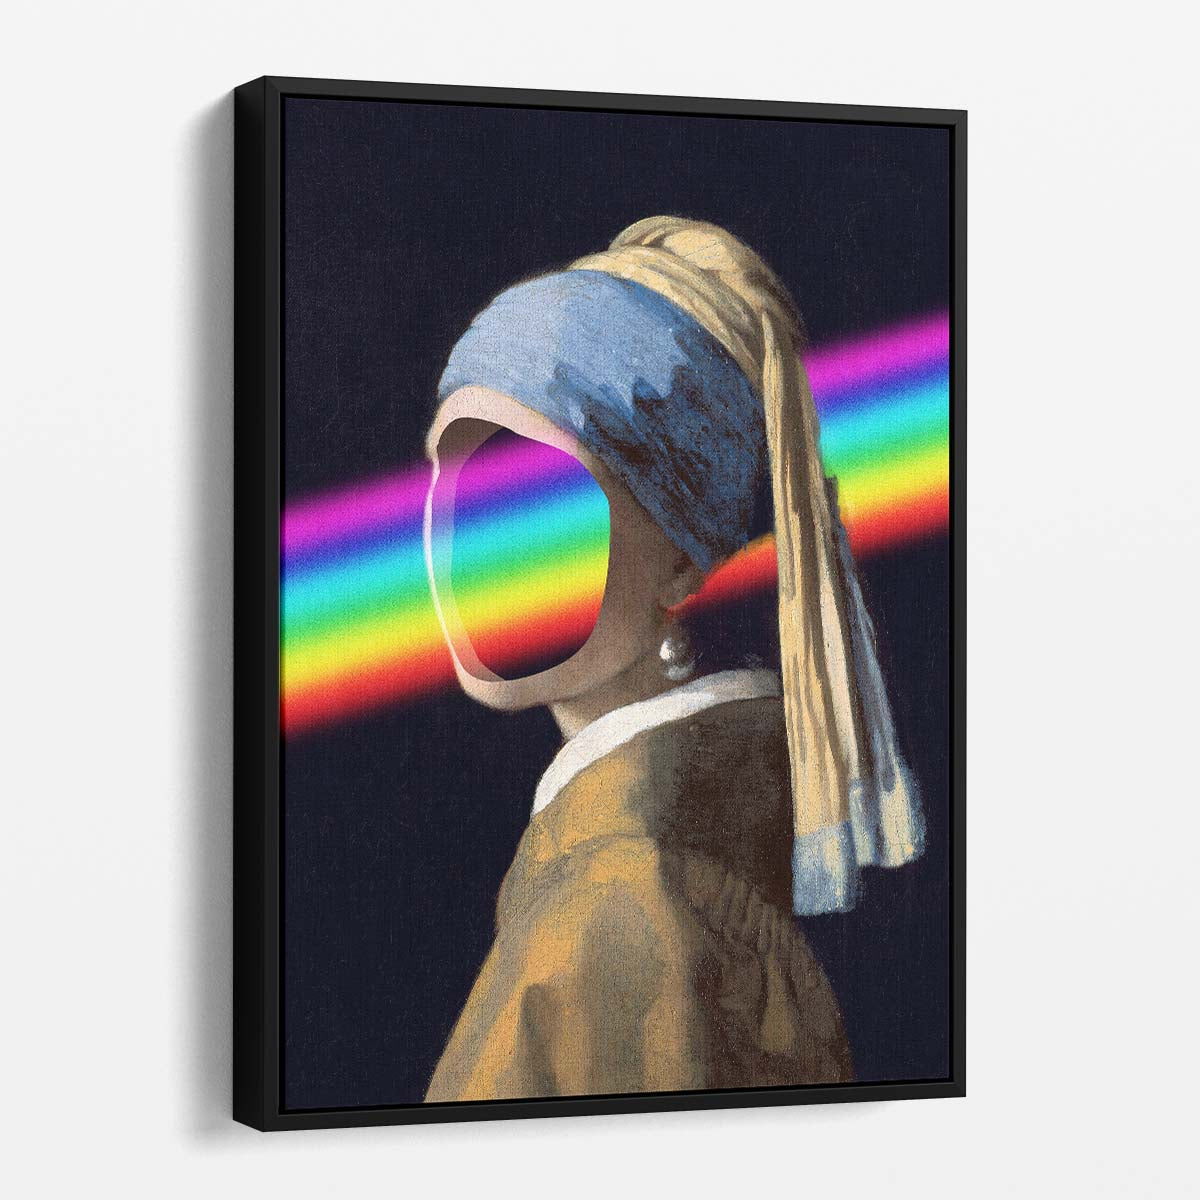 Vermeer's Girl with Pearl Earring Illustration Digital Rainbow Portrait Art by Luxuriance Designs, made in USA